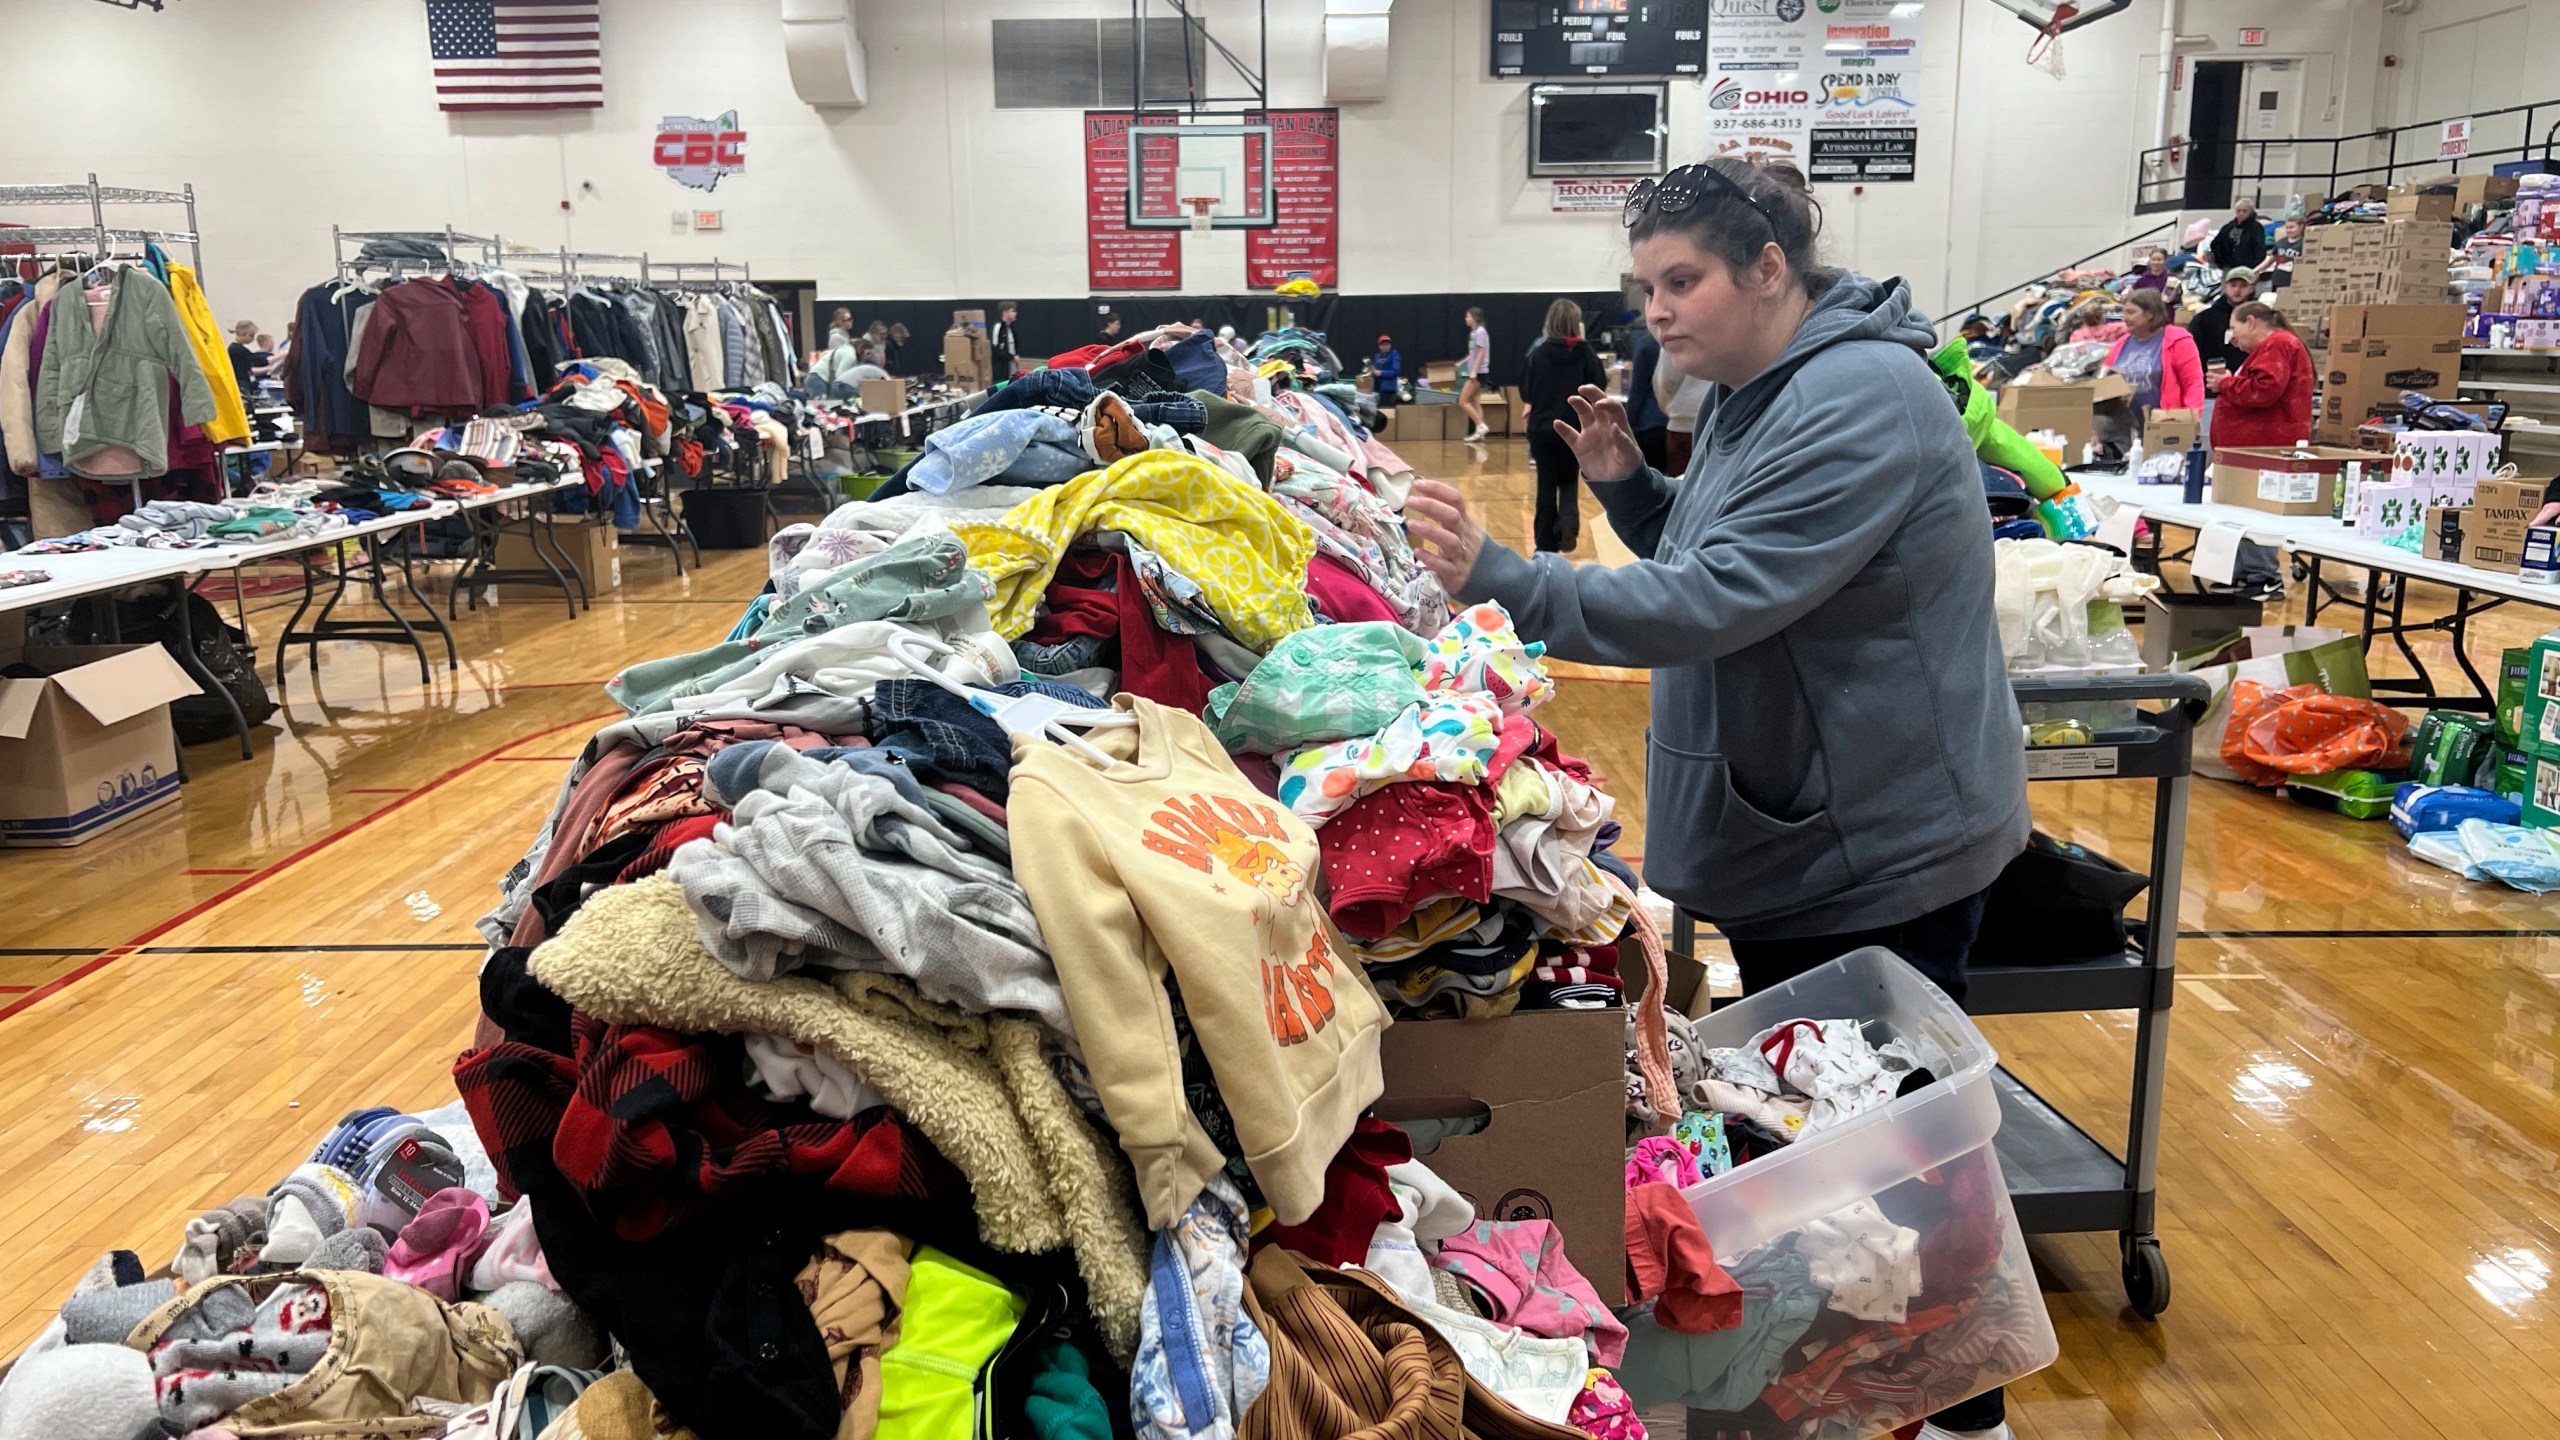 A woman searches through clothing at Indian Lake High School on Saturday, March 16, 2024, in Indian Lake, in Logan County, Ohio. The high school has become a donation center after a tornado swept through the Indian Lake area Thursday. The Indian Lake area in Ohio’s Logan County was one of the hardest hit. (AP Photo/Patrick Orsagos)